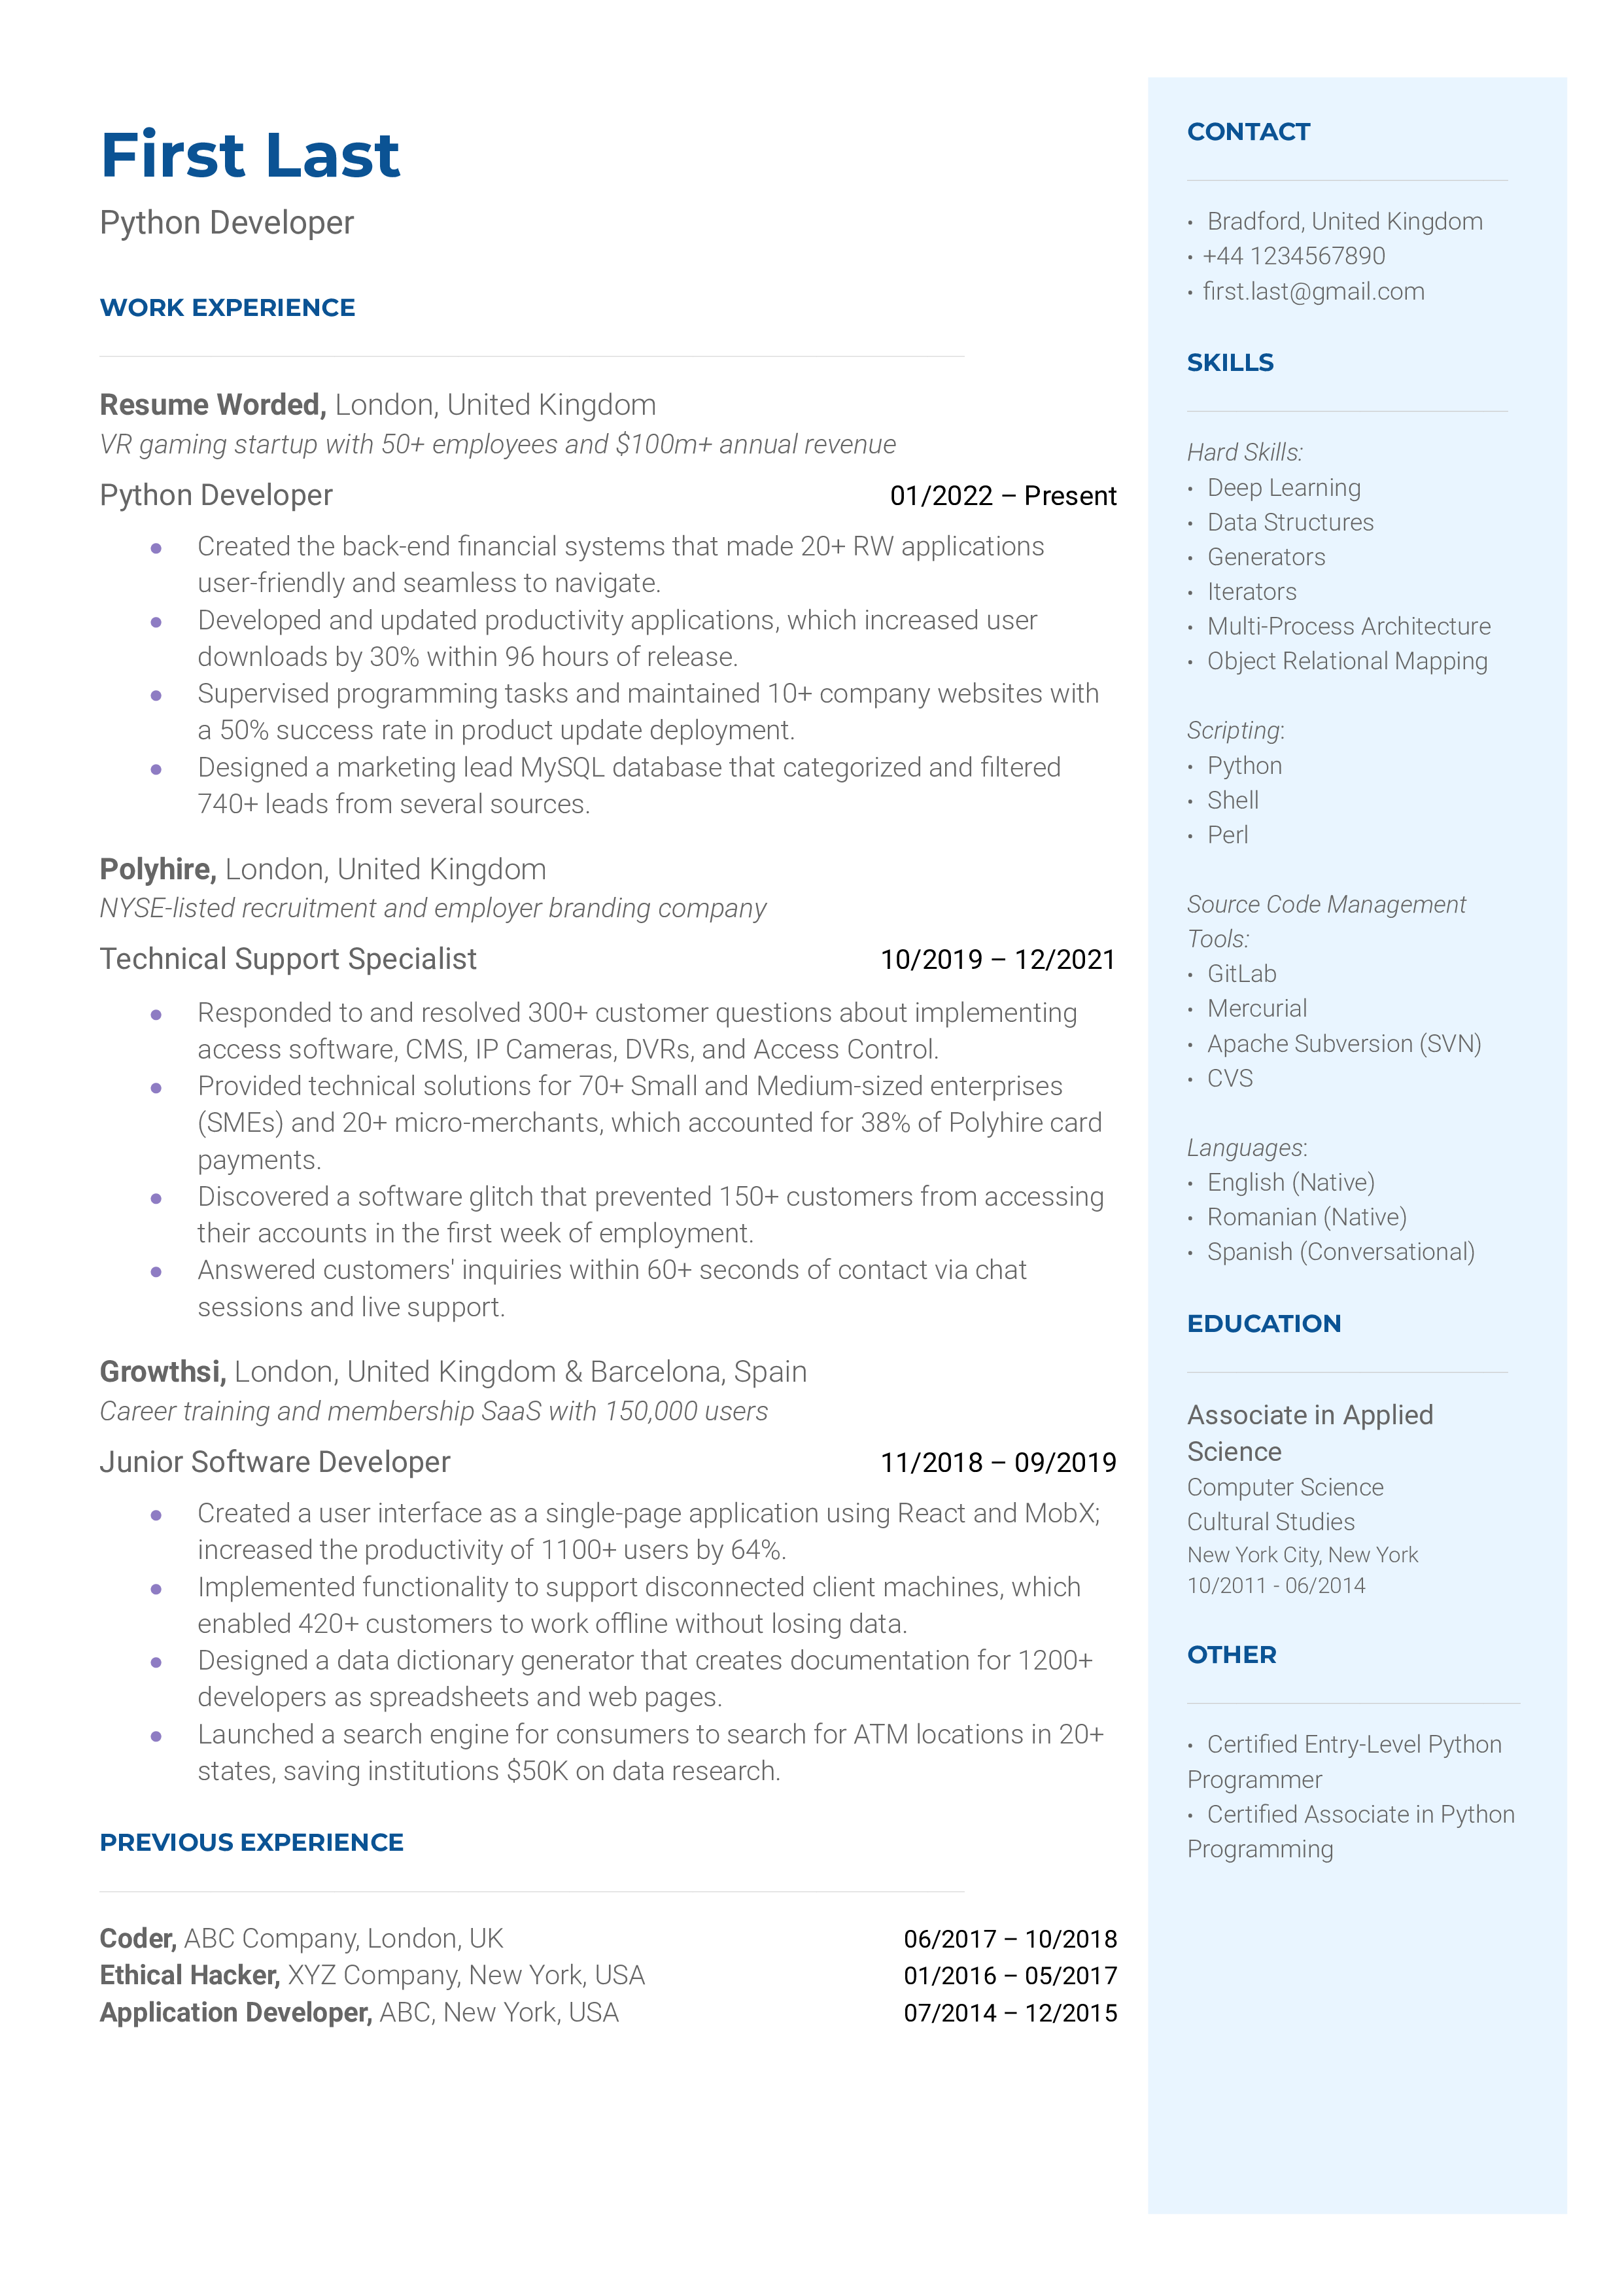 A Python developer's CV showcasing their skills in Python libraries and machine learning expertise.